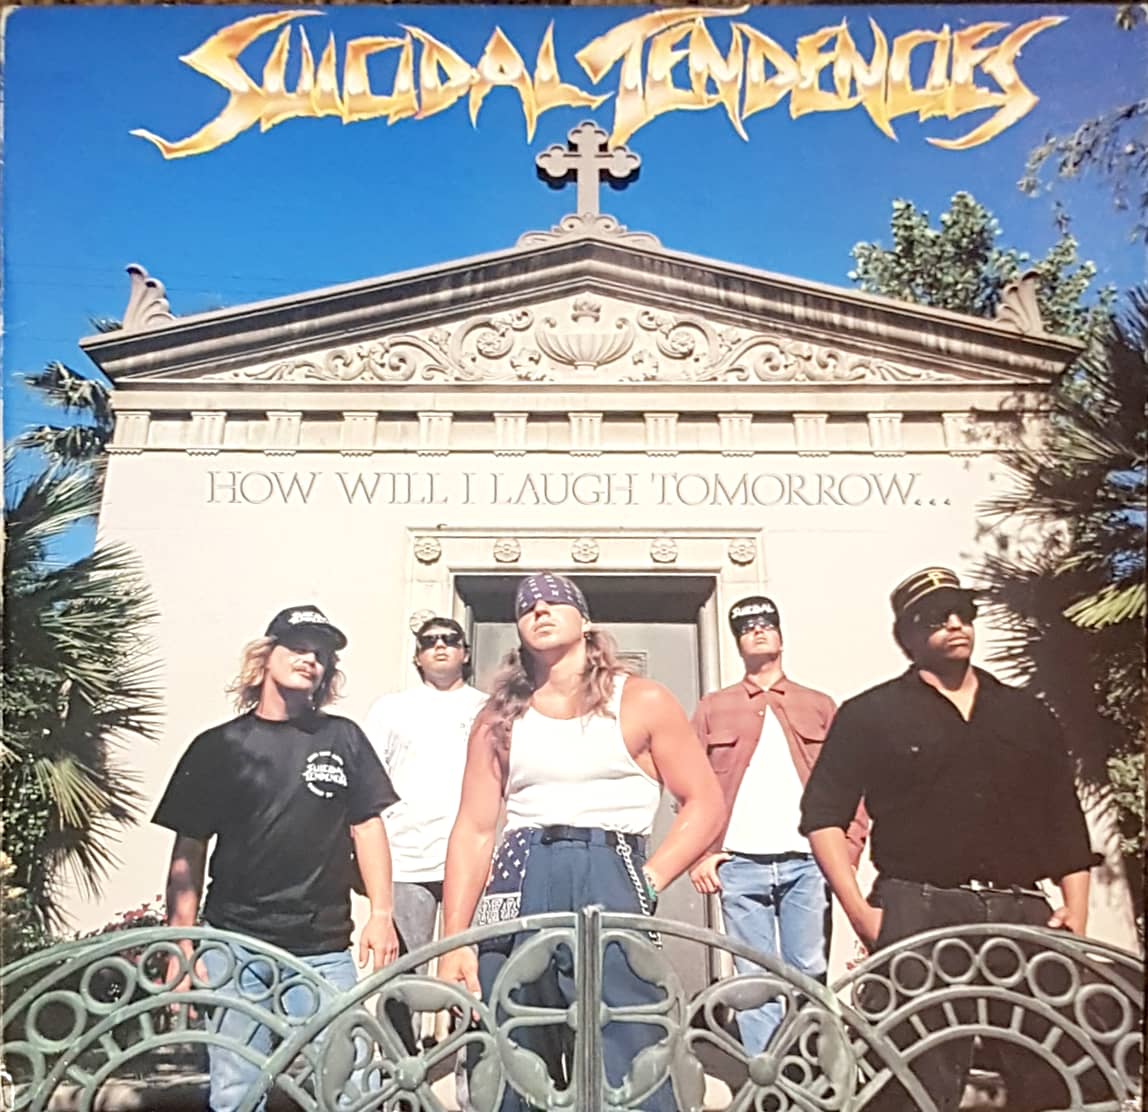 Pre Loved Record - Suicidal Tendencies - How Will I Laugh Tomorrow 